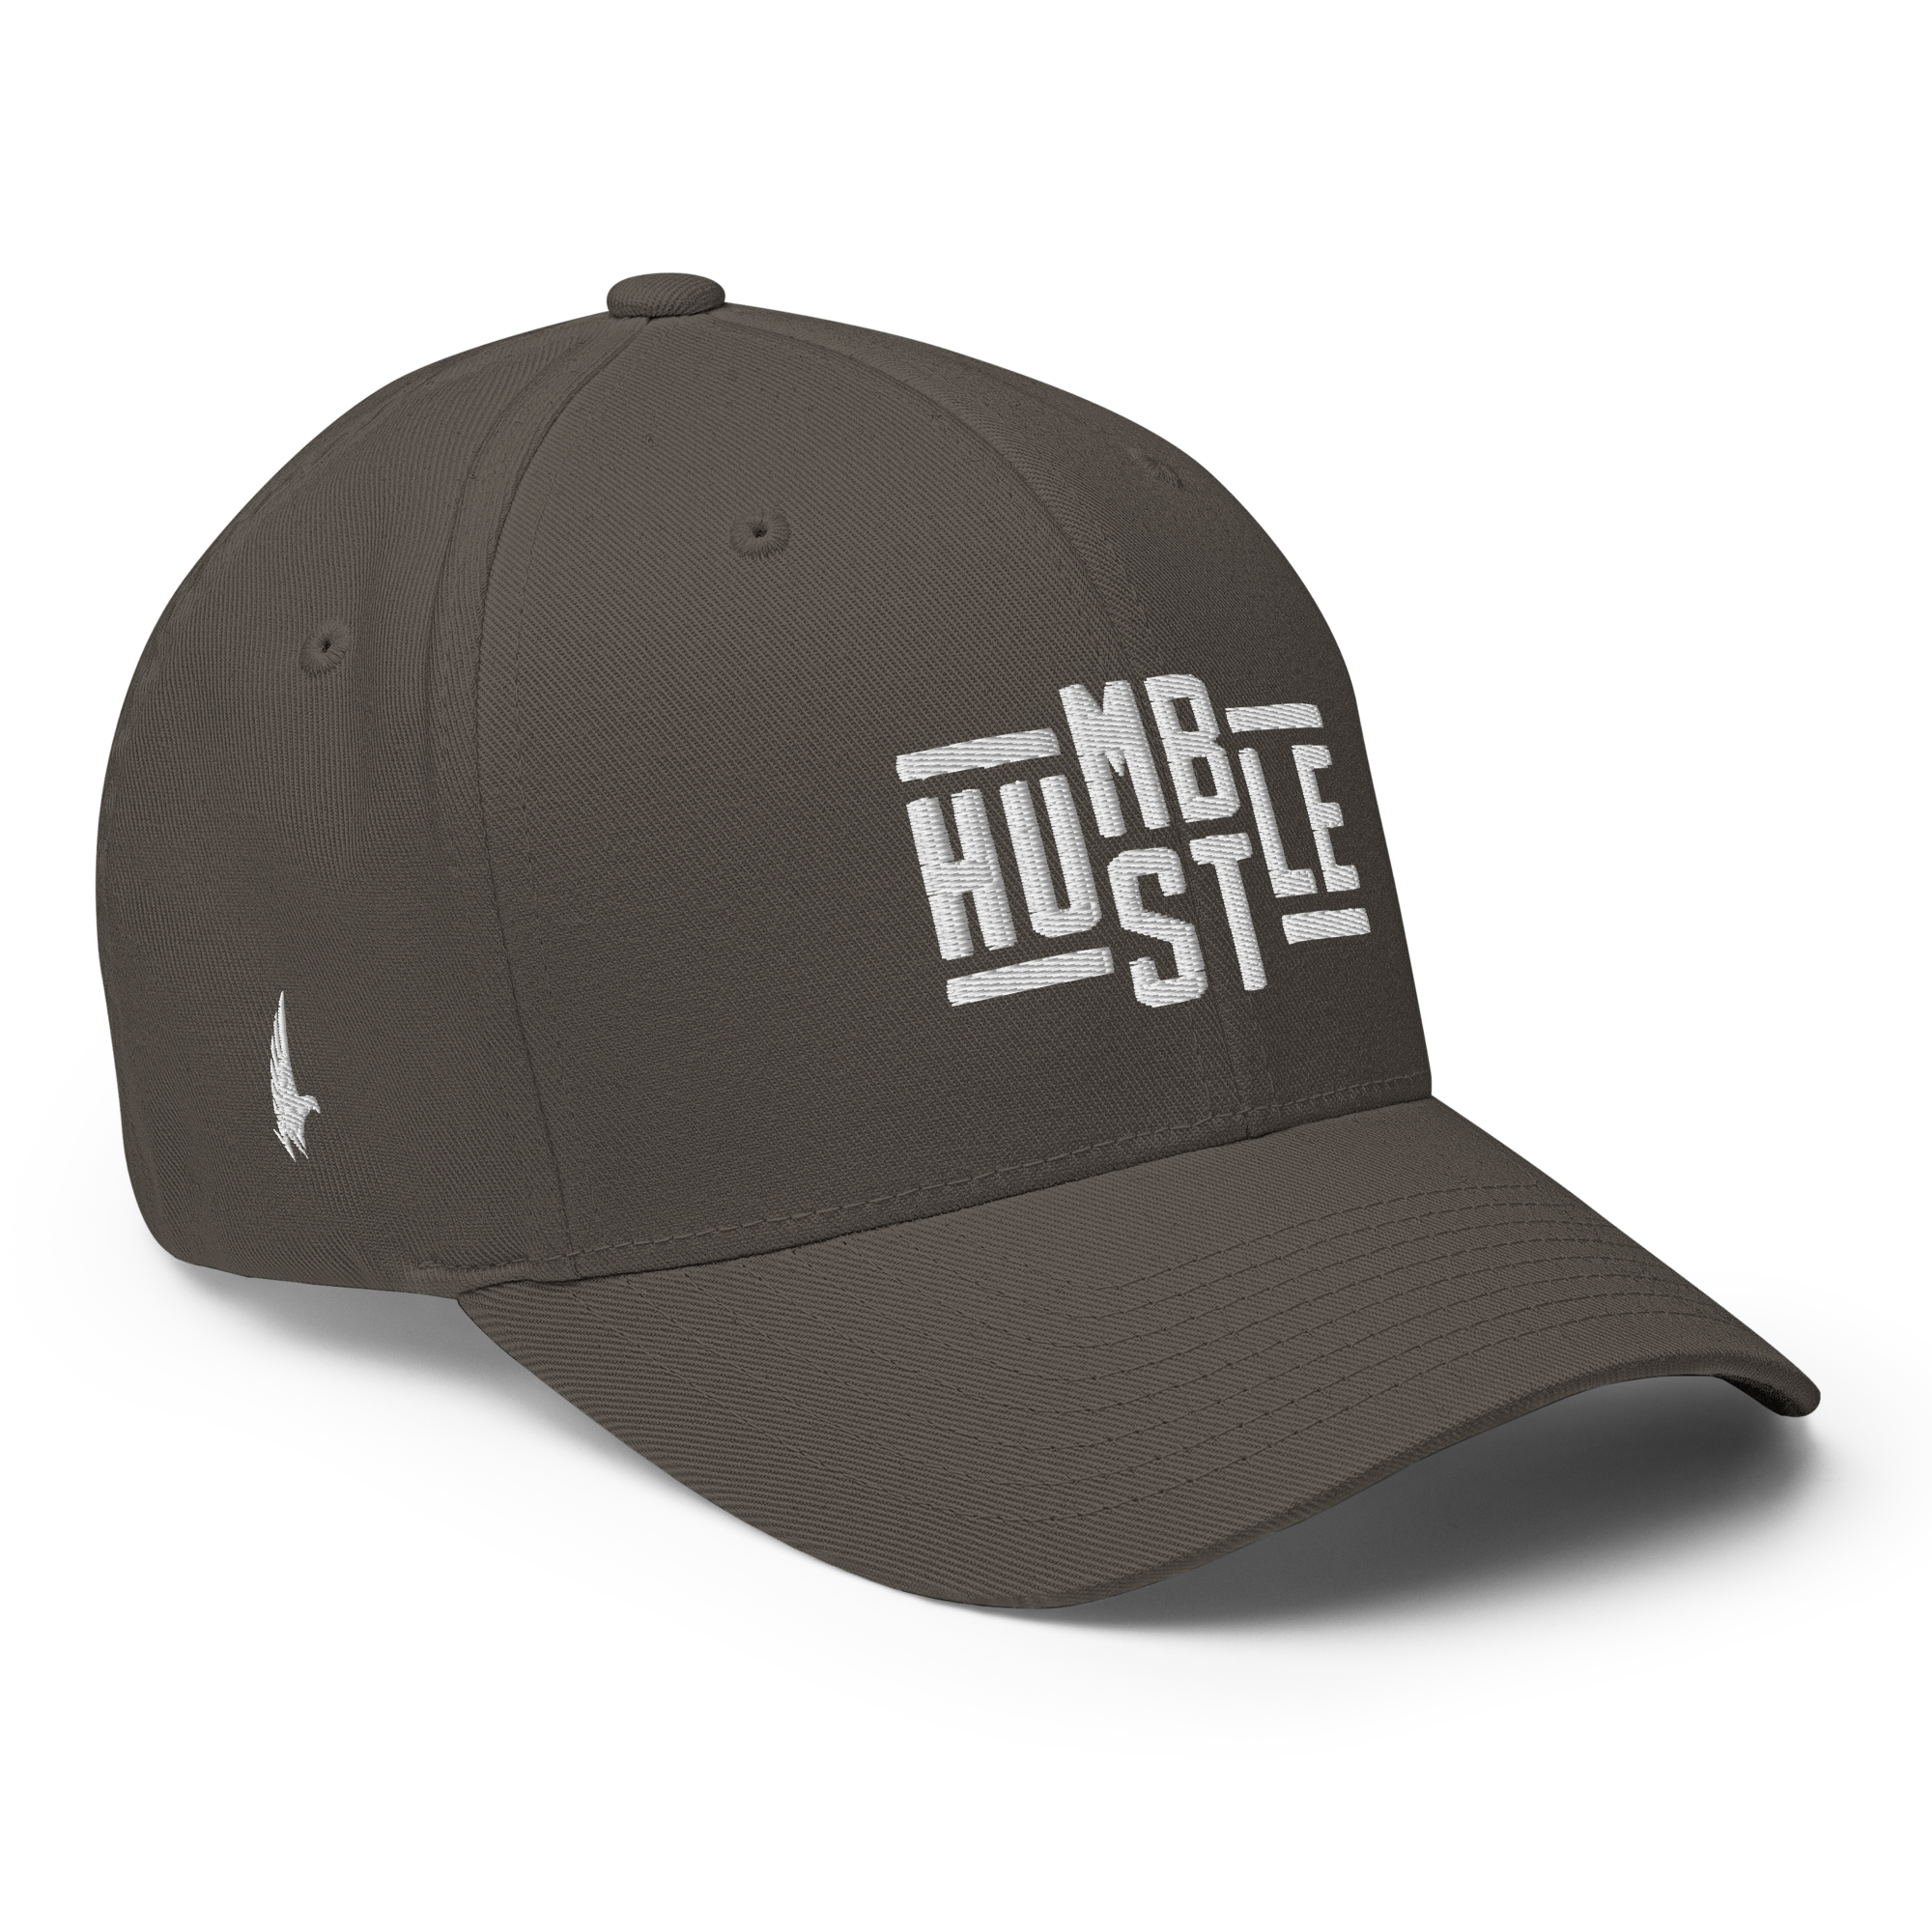 Loyalty Vibes Hustle Fitted Hat Charcoal Gray / White Fitted - Loyalty Vibes